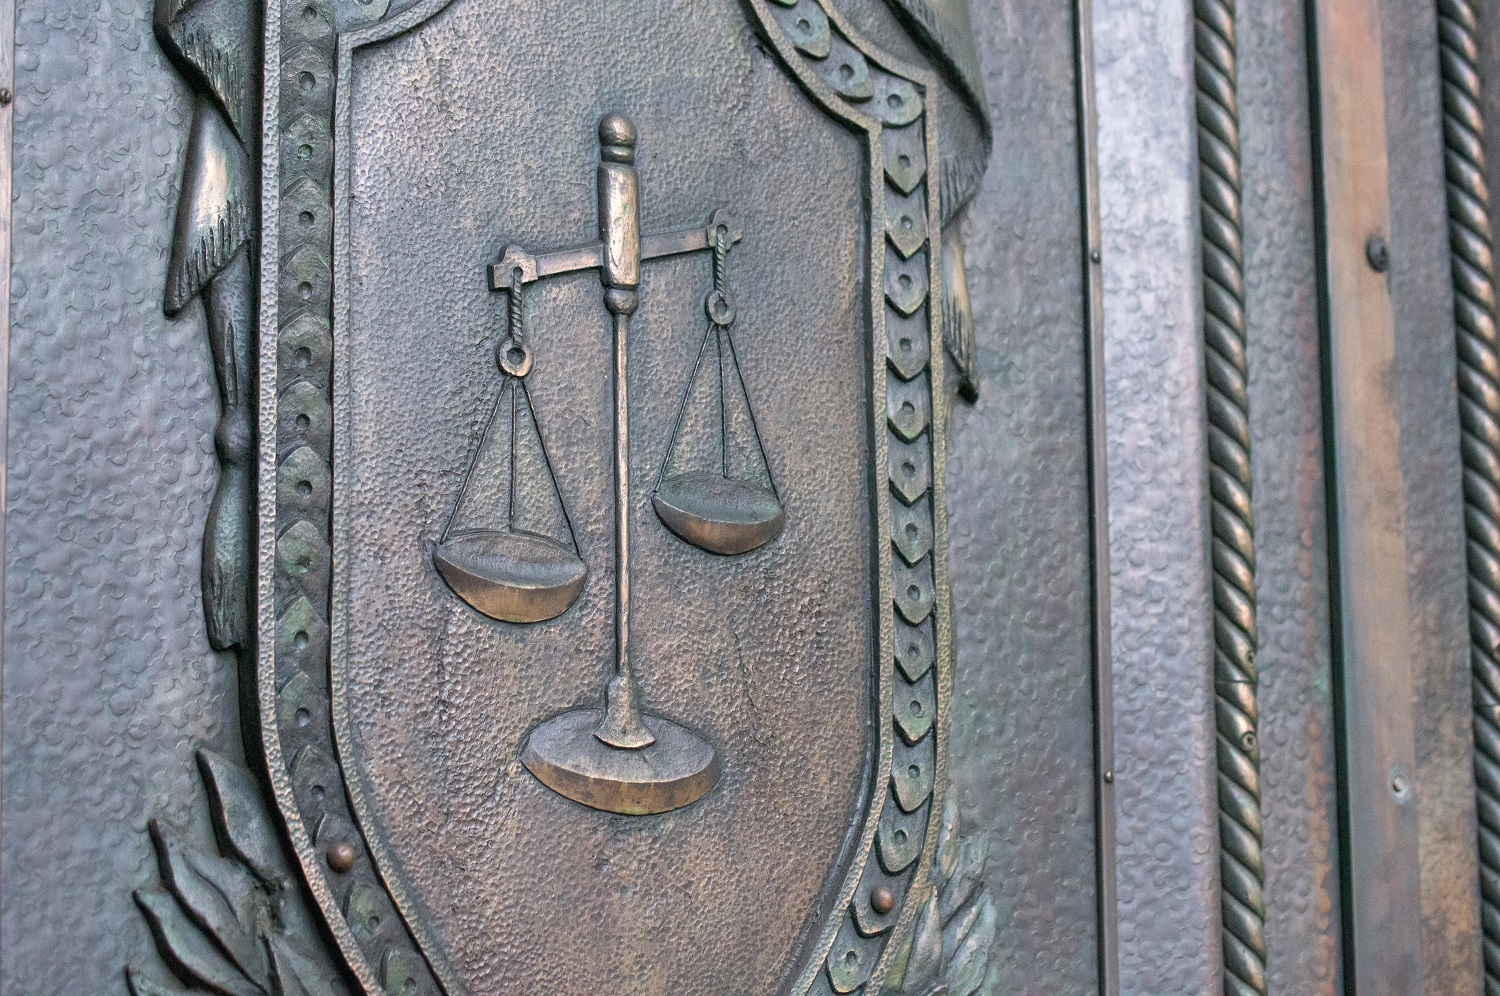 The scales of Themis, a detail on the building of the Supreme Court in Russia.